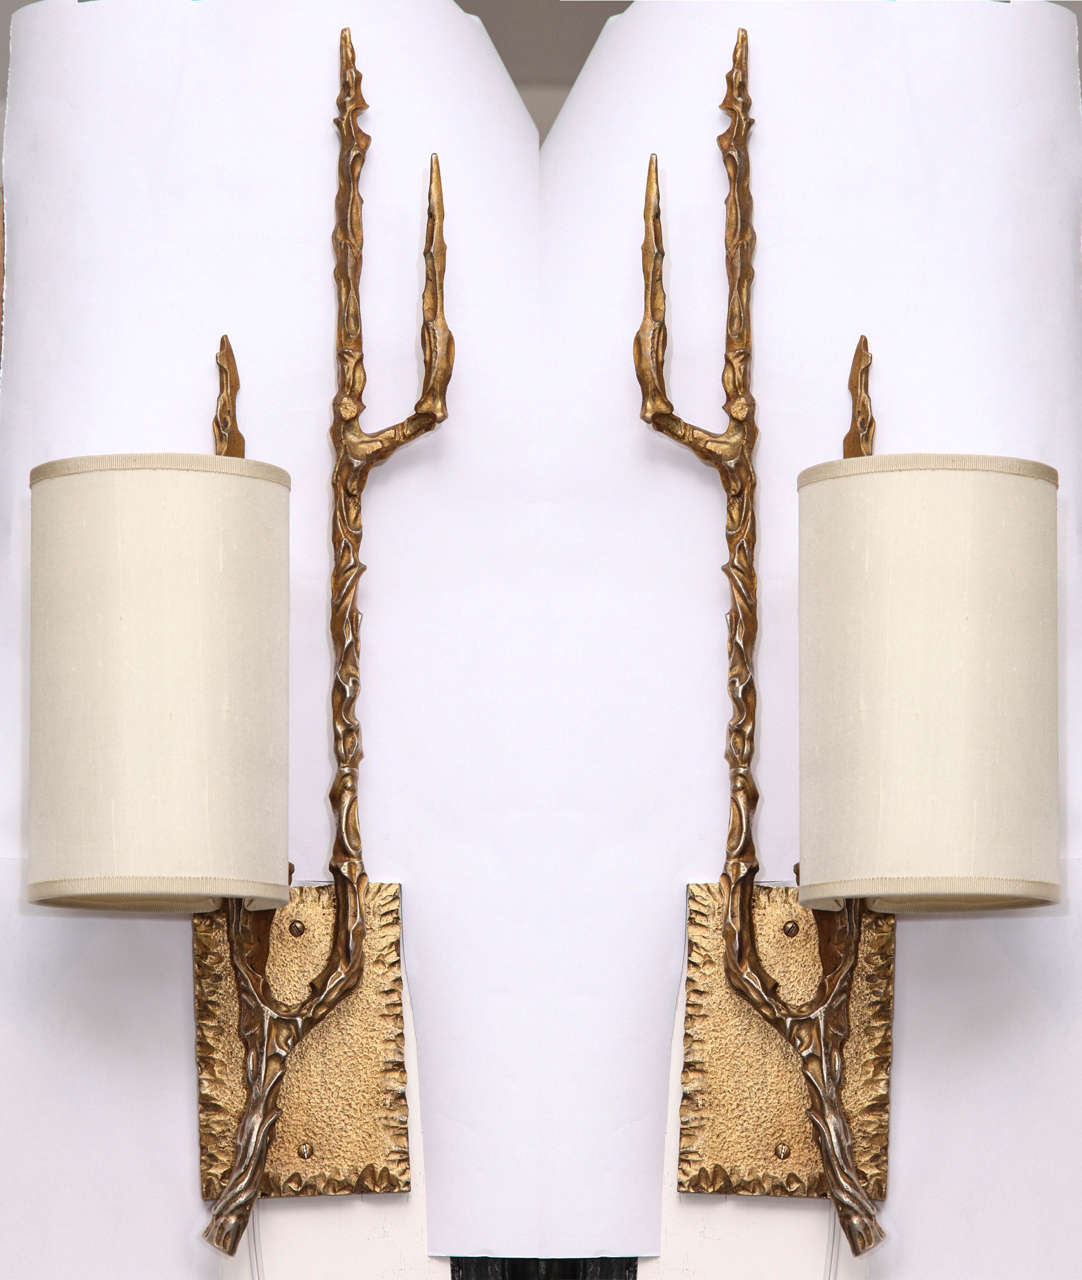 A pair of 1960s Brutalist style sculptural sconces, crafted of patinated bronze in the form of elongated branches, affixed to textured back-plates.